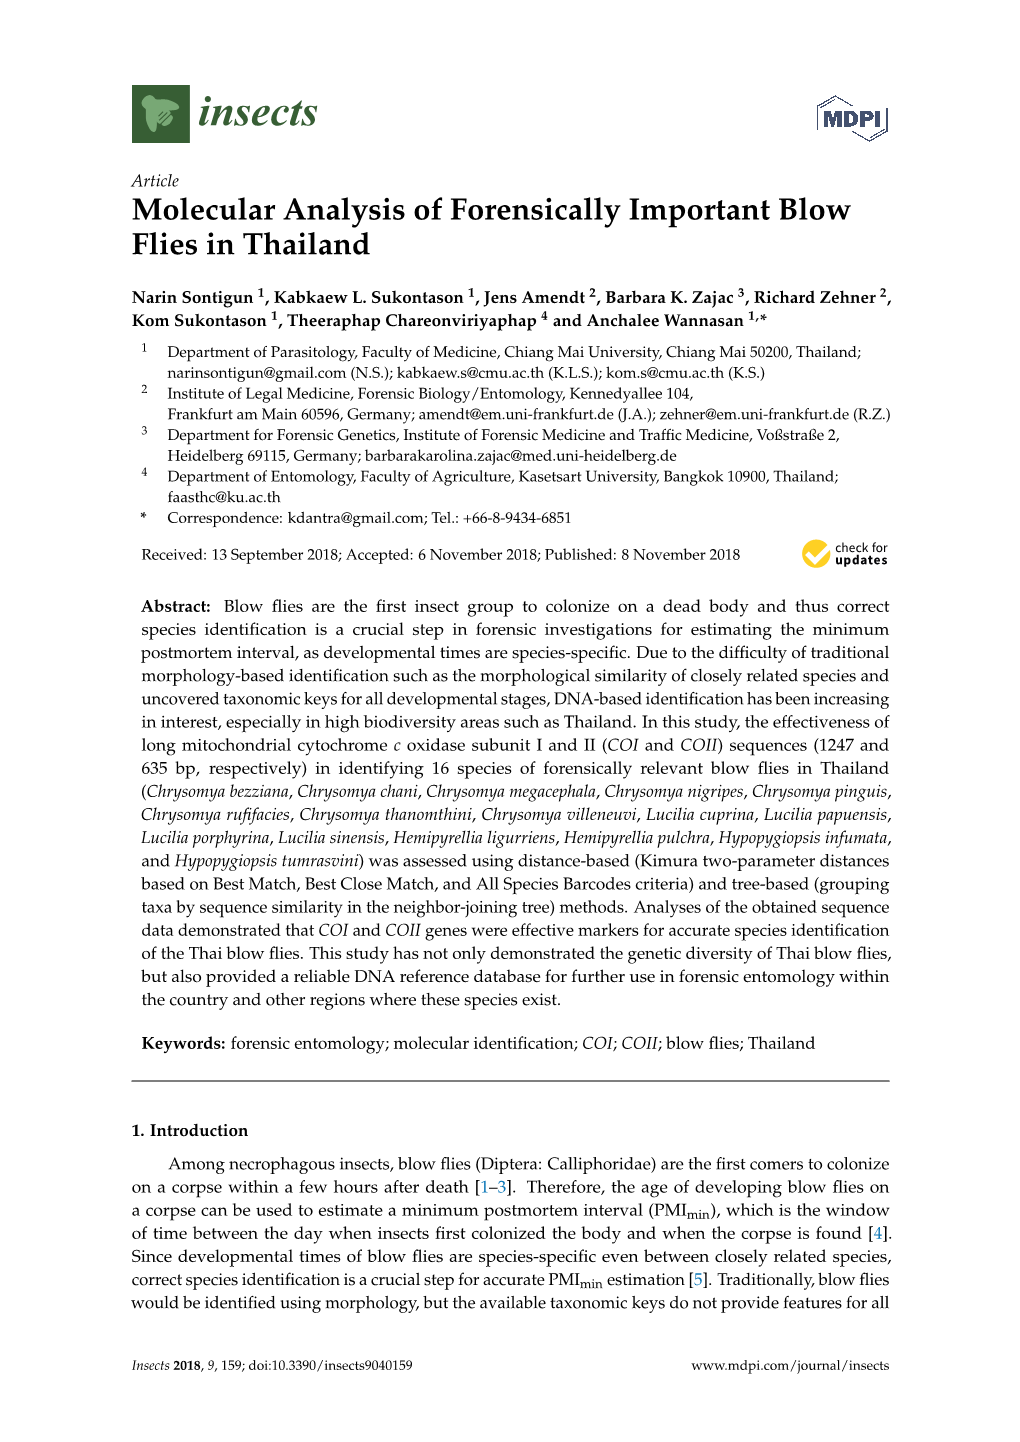 Molecular Analysis of Forensically Important Blow Flies in Thailand